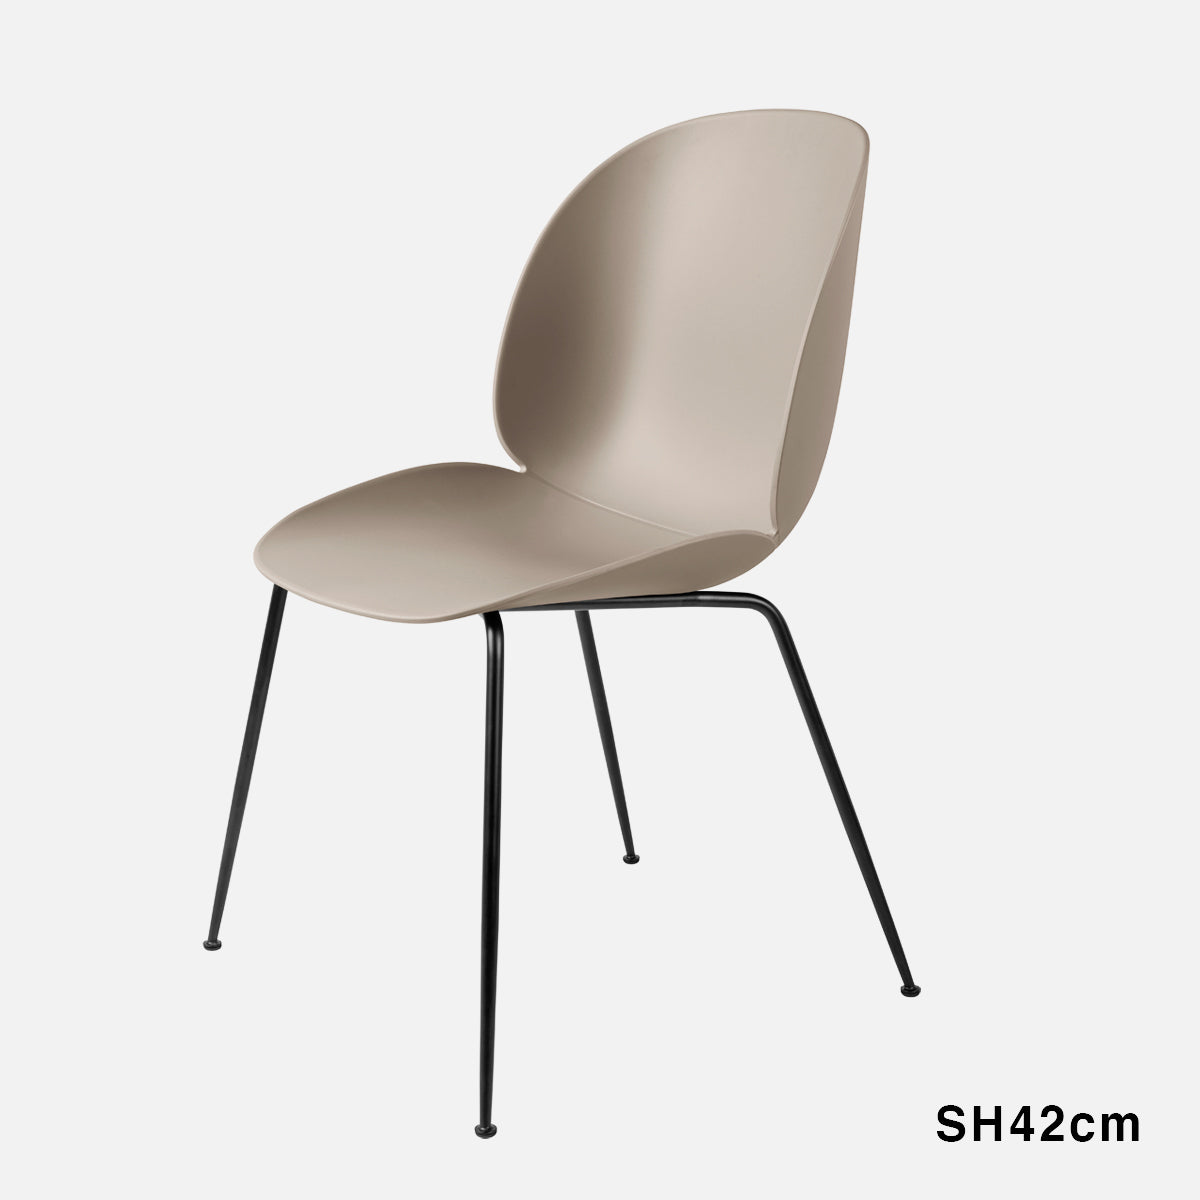 Beetle Chair Un-upholstered New Beige Conic Base Black 42cm